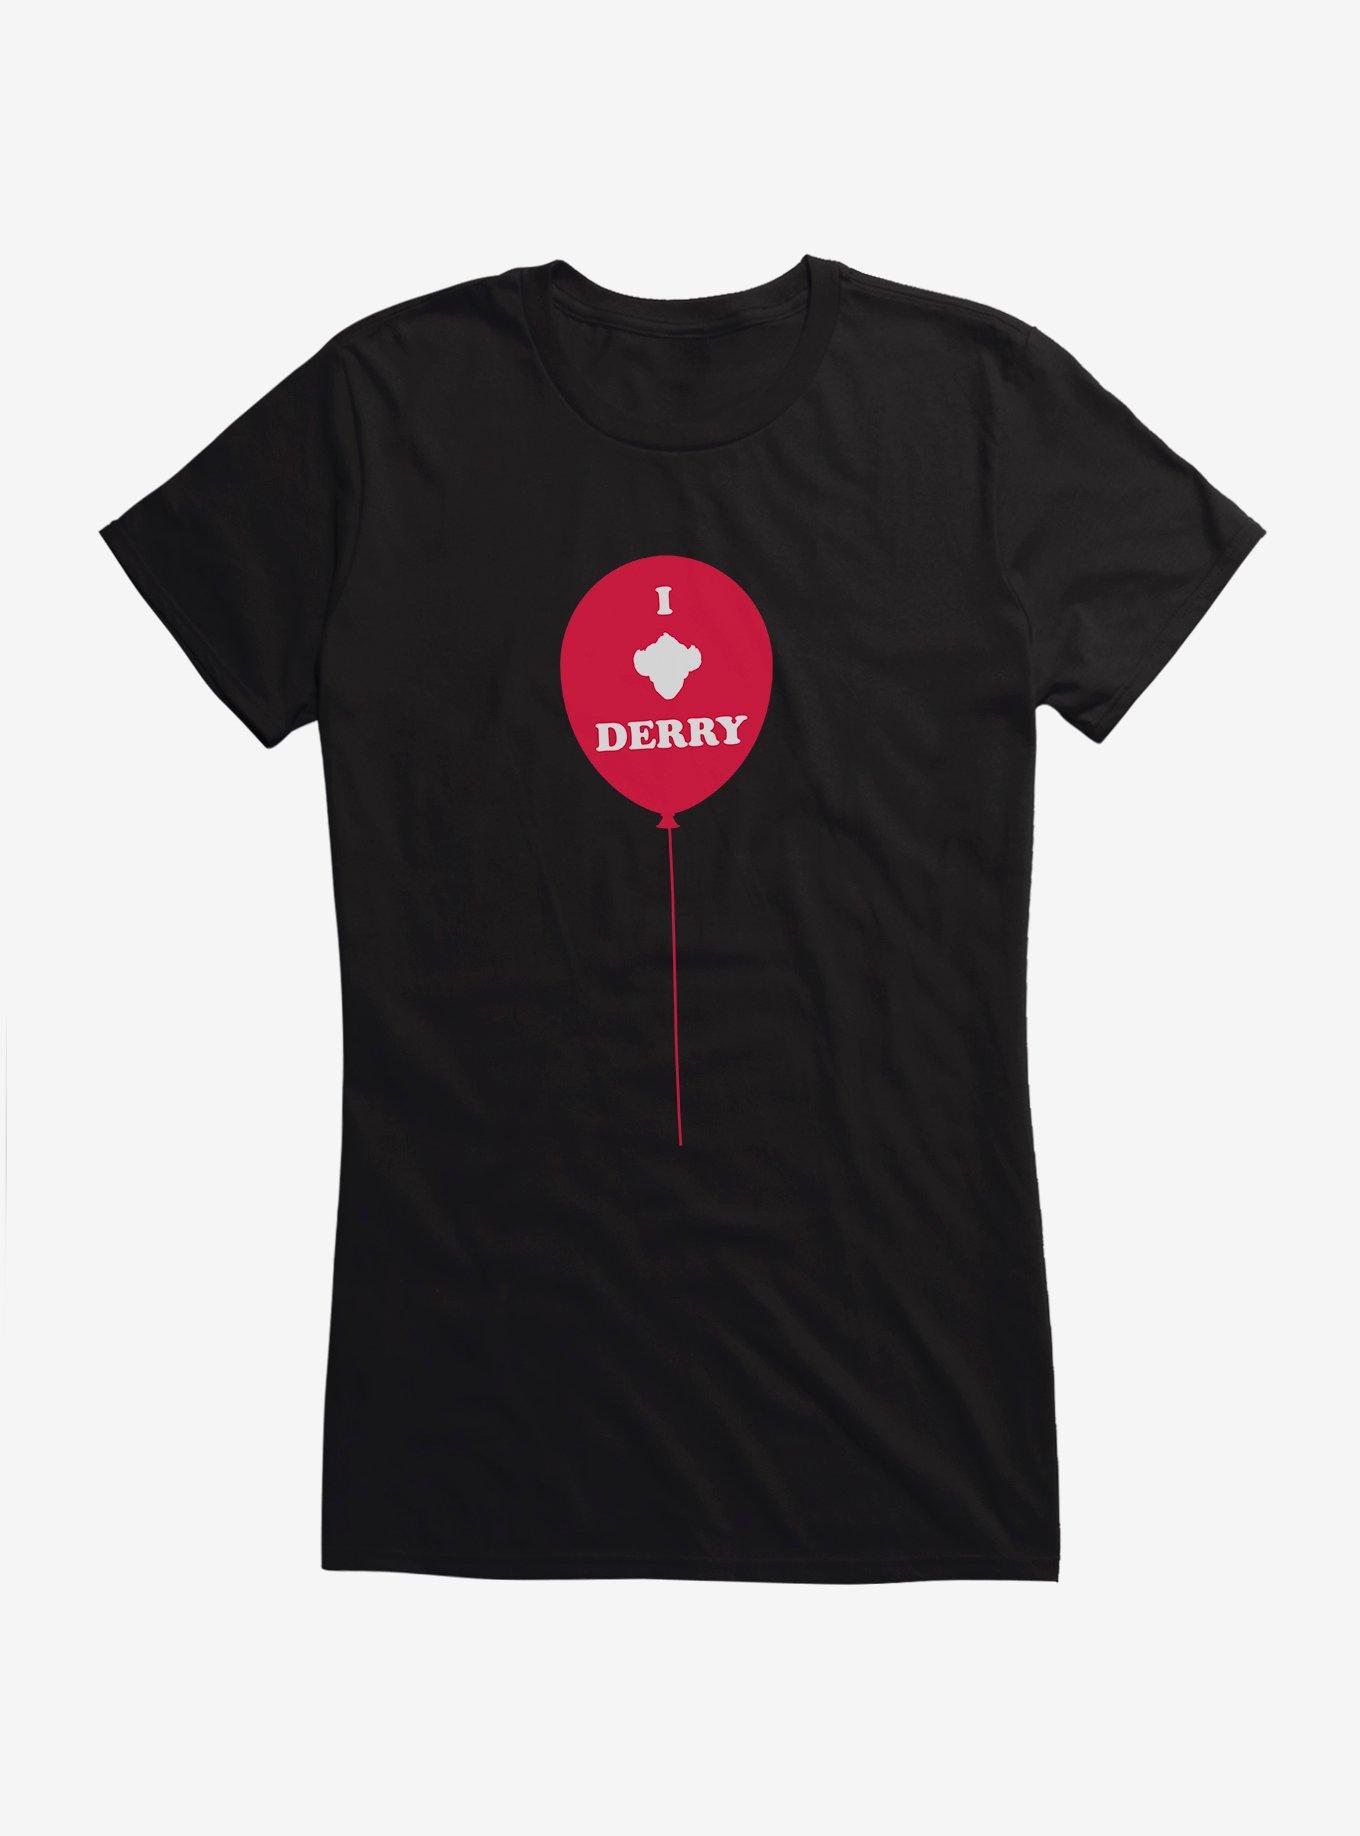 IT Chapter Two I Pennywise Derry Balloon Girls T-Shirt, BLACK, hi-res